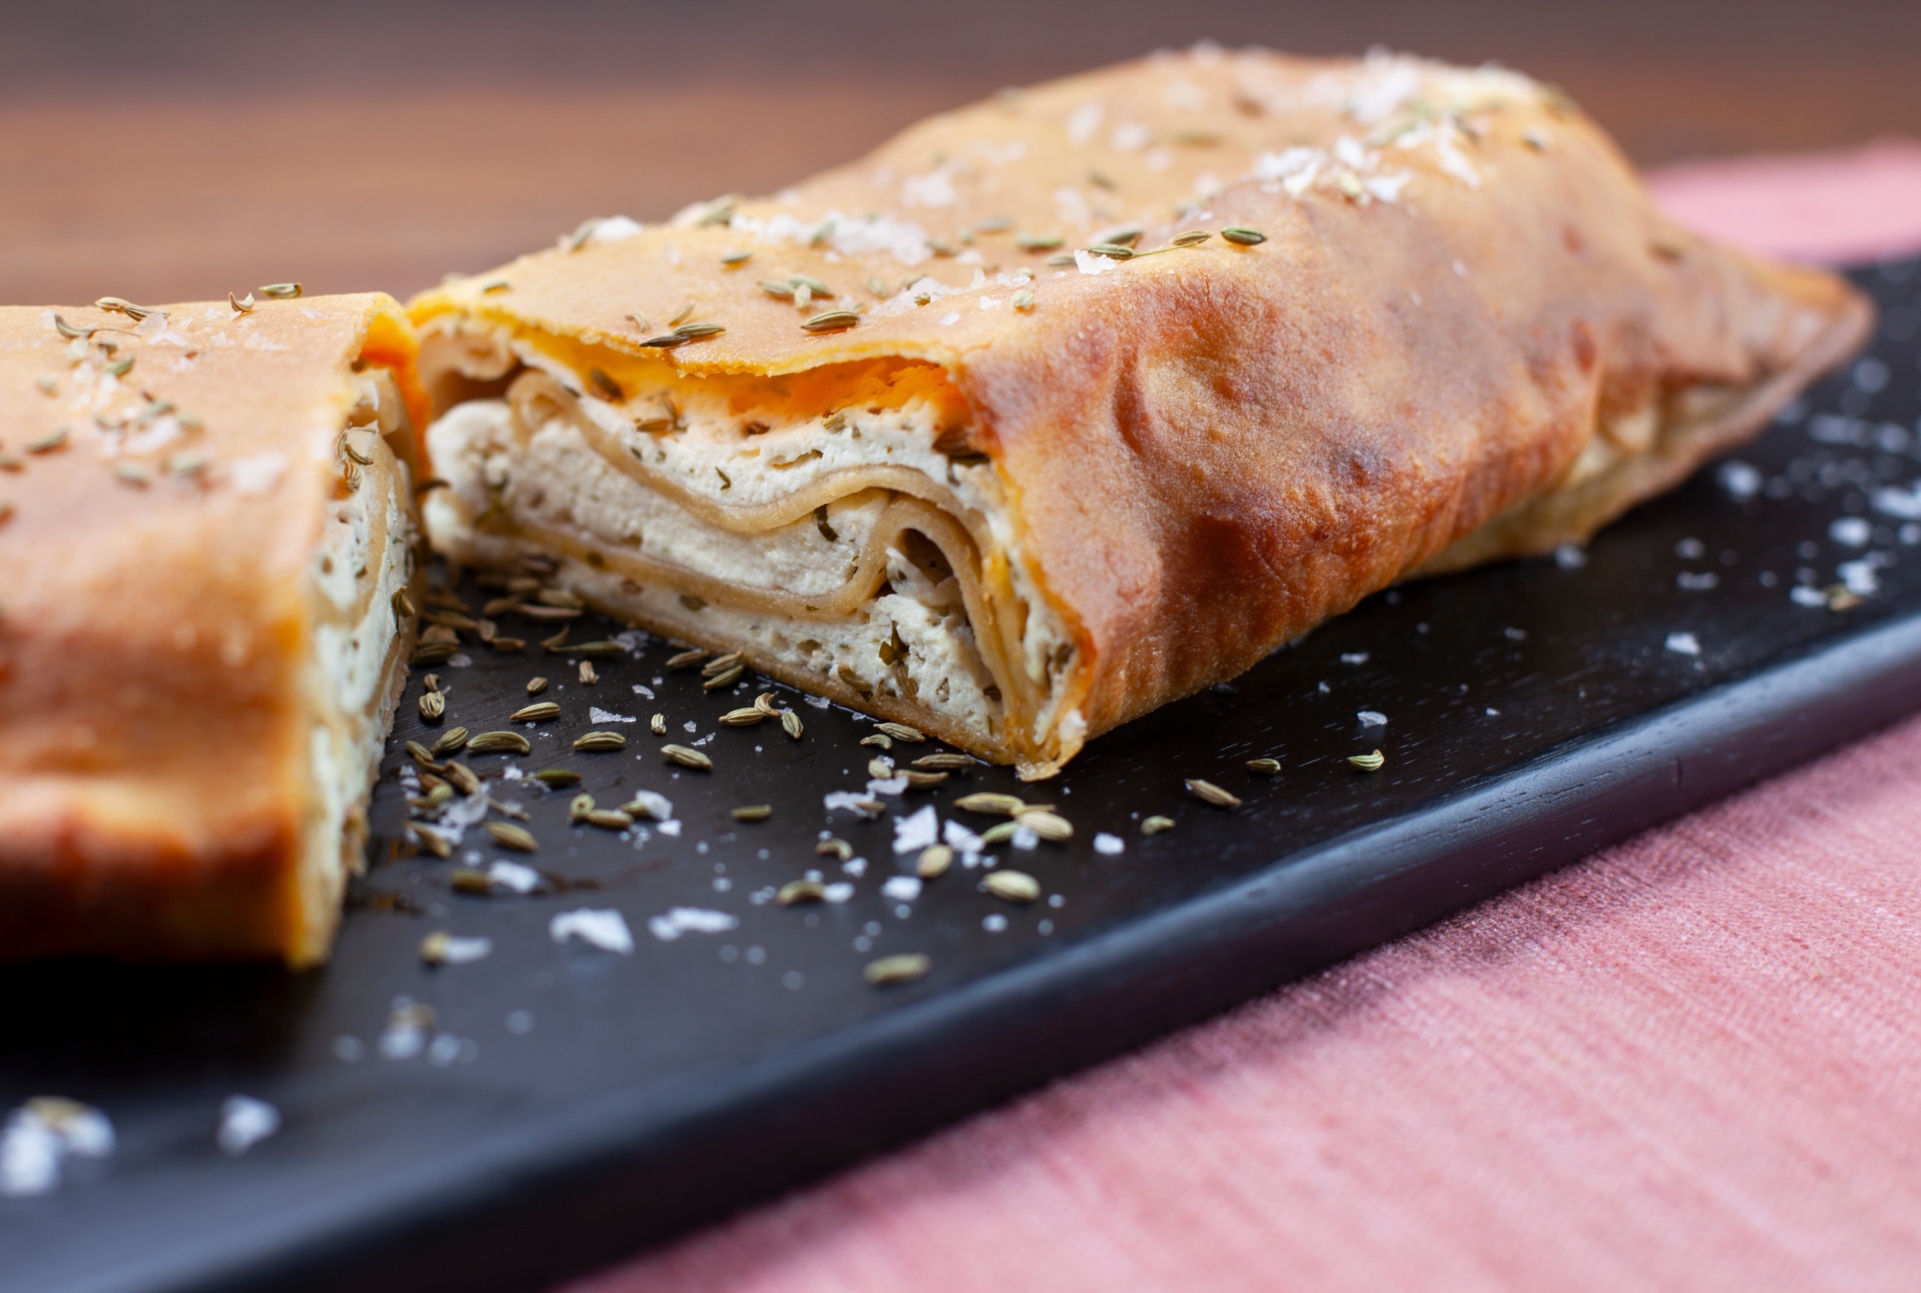 Folded flatbread with ricotta and fennel seeds